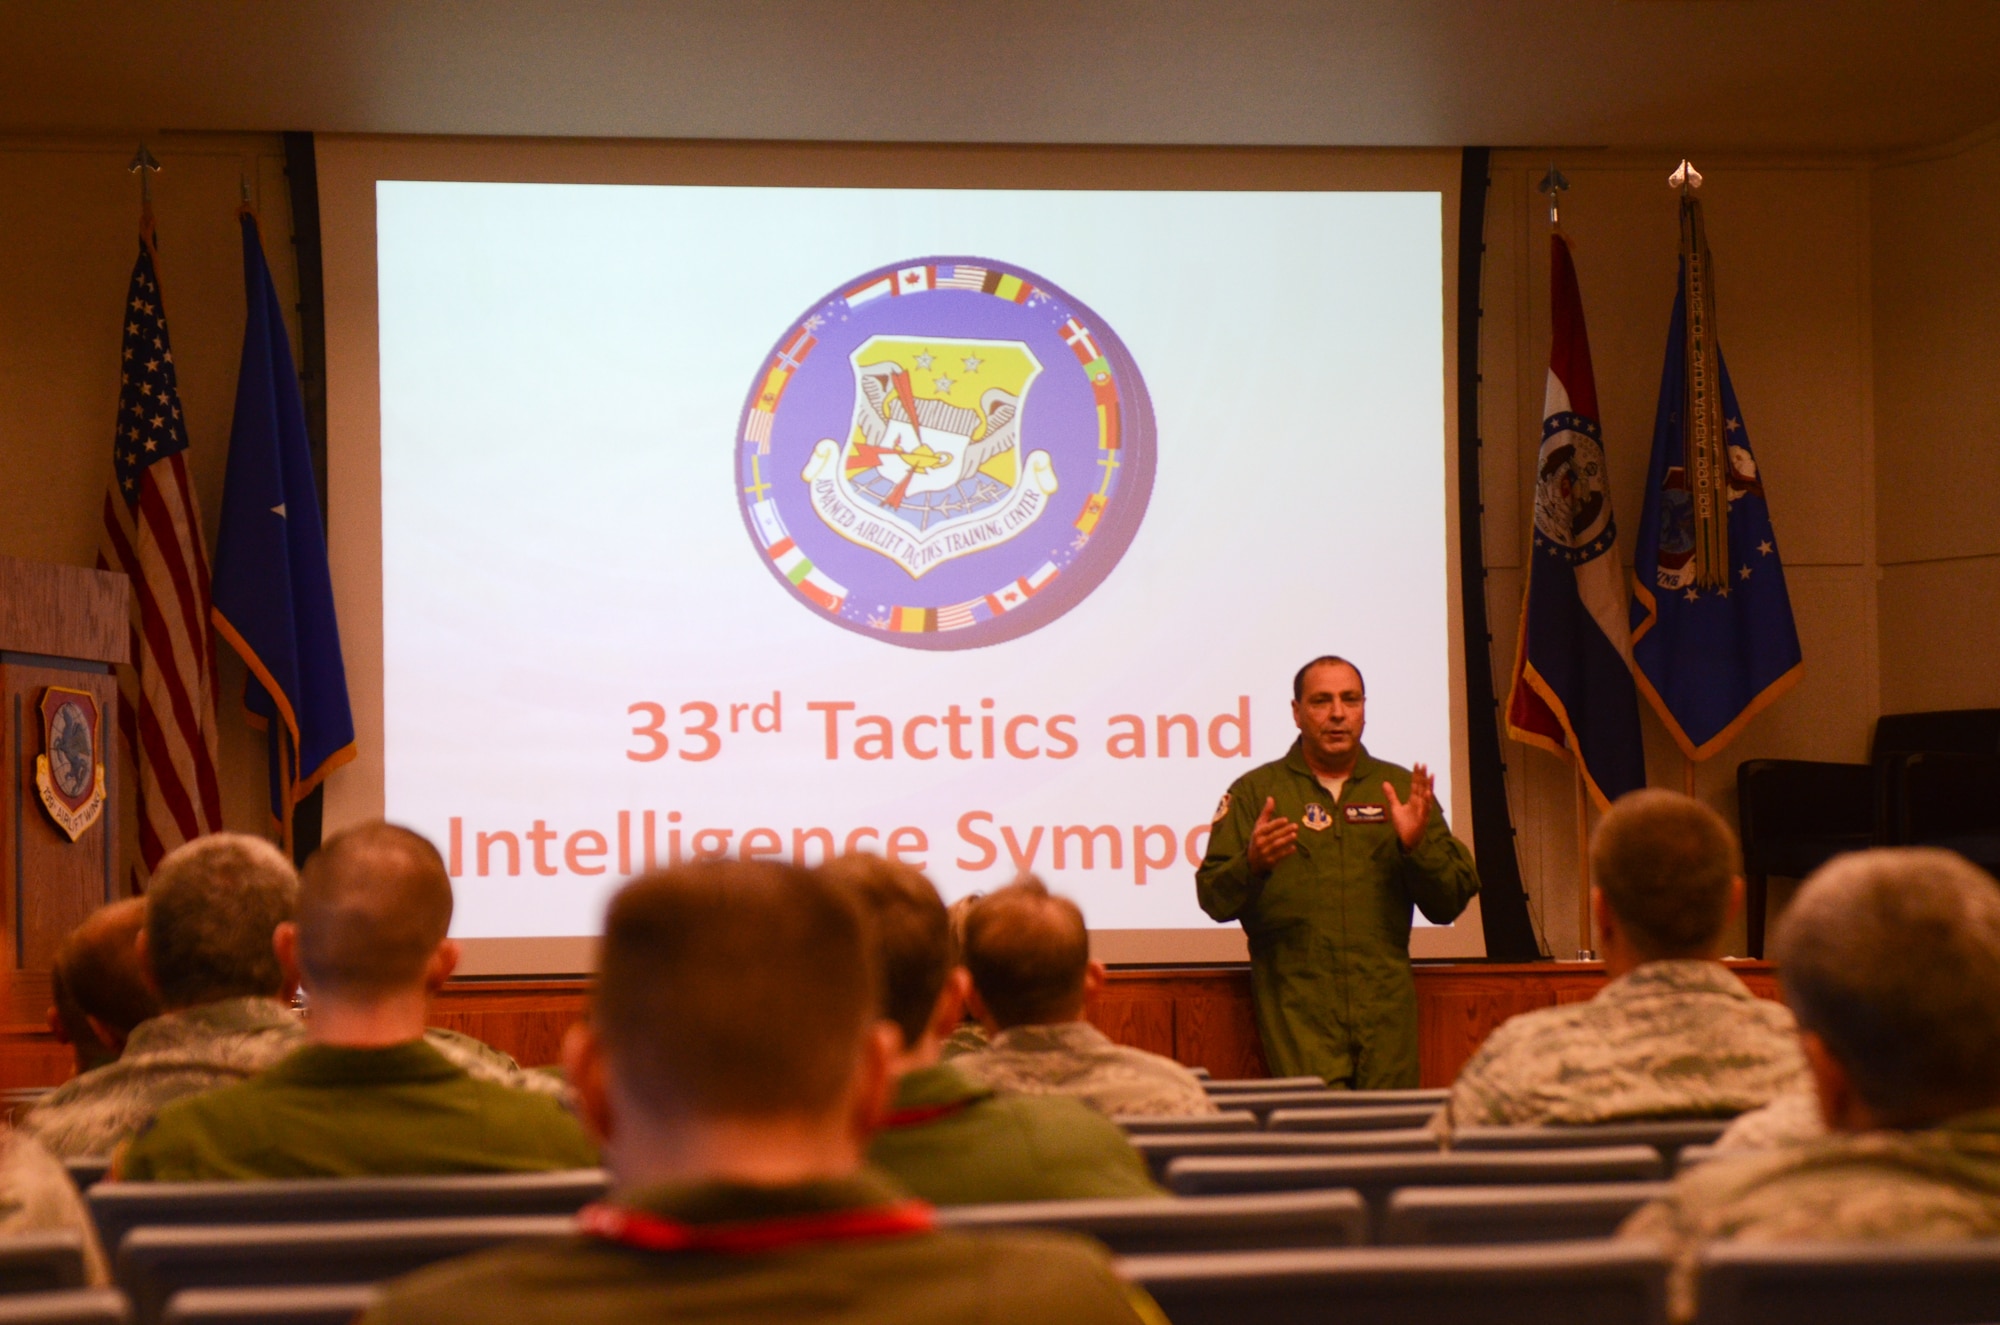 U.S. Air Force Col. Ralph Schwader, commander of the 139th Airlift Wing, Missouri Air National Guard, speaks during 33rd Annual Tactics and Intelligence Symposium Jan. 27, 2015 at Rosecrans Air National Guard Base, Mo. The Advanced Airlift Tactics Training Center hosts the symposium and the theme this year is international innovation and integration in mobility air forces. (U.S. Air National Guard photo by Tech. Sgt. Michael Crane/Released)